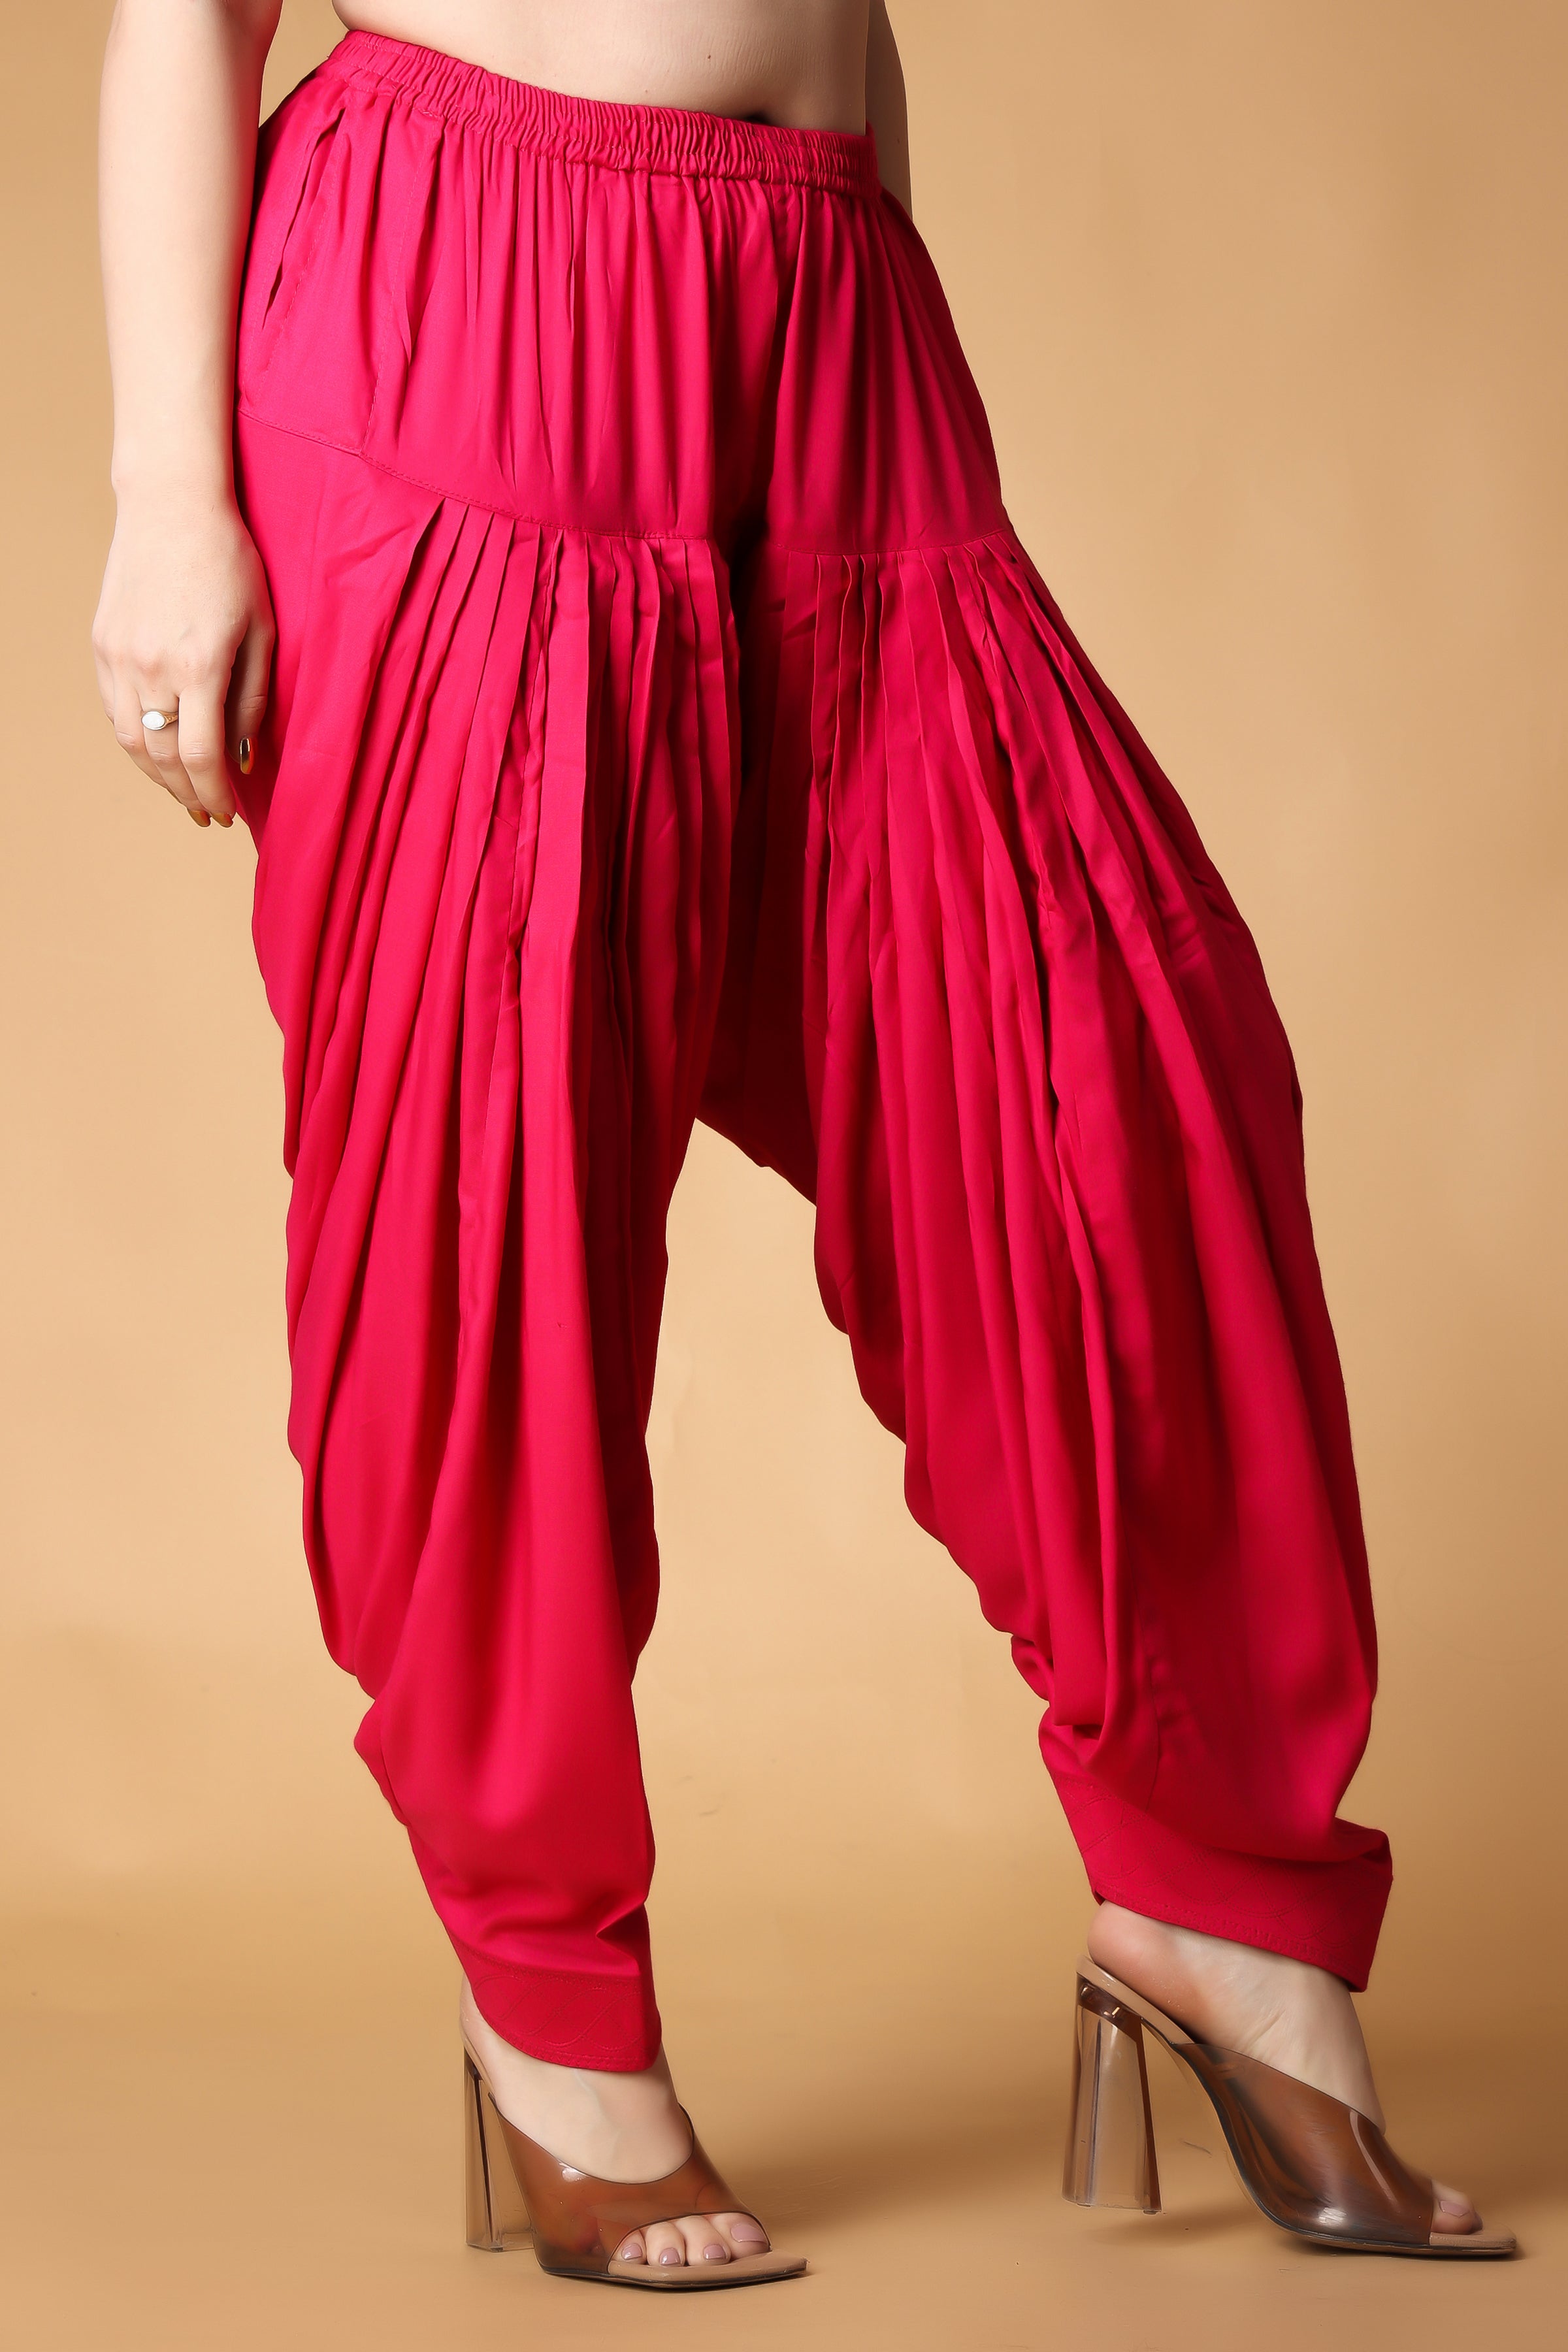 Red Patiala - Buy Red Patiala online in India